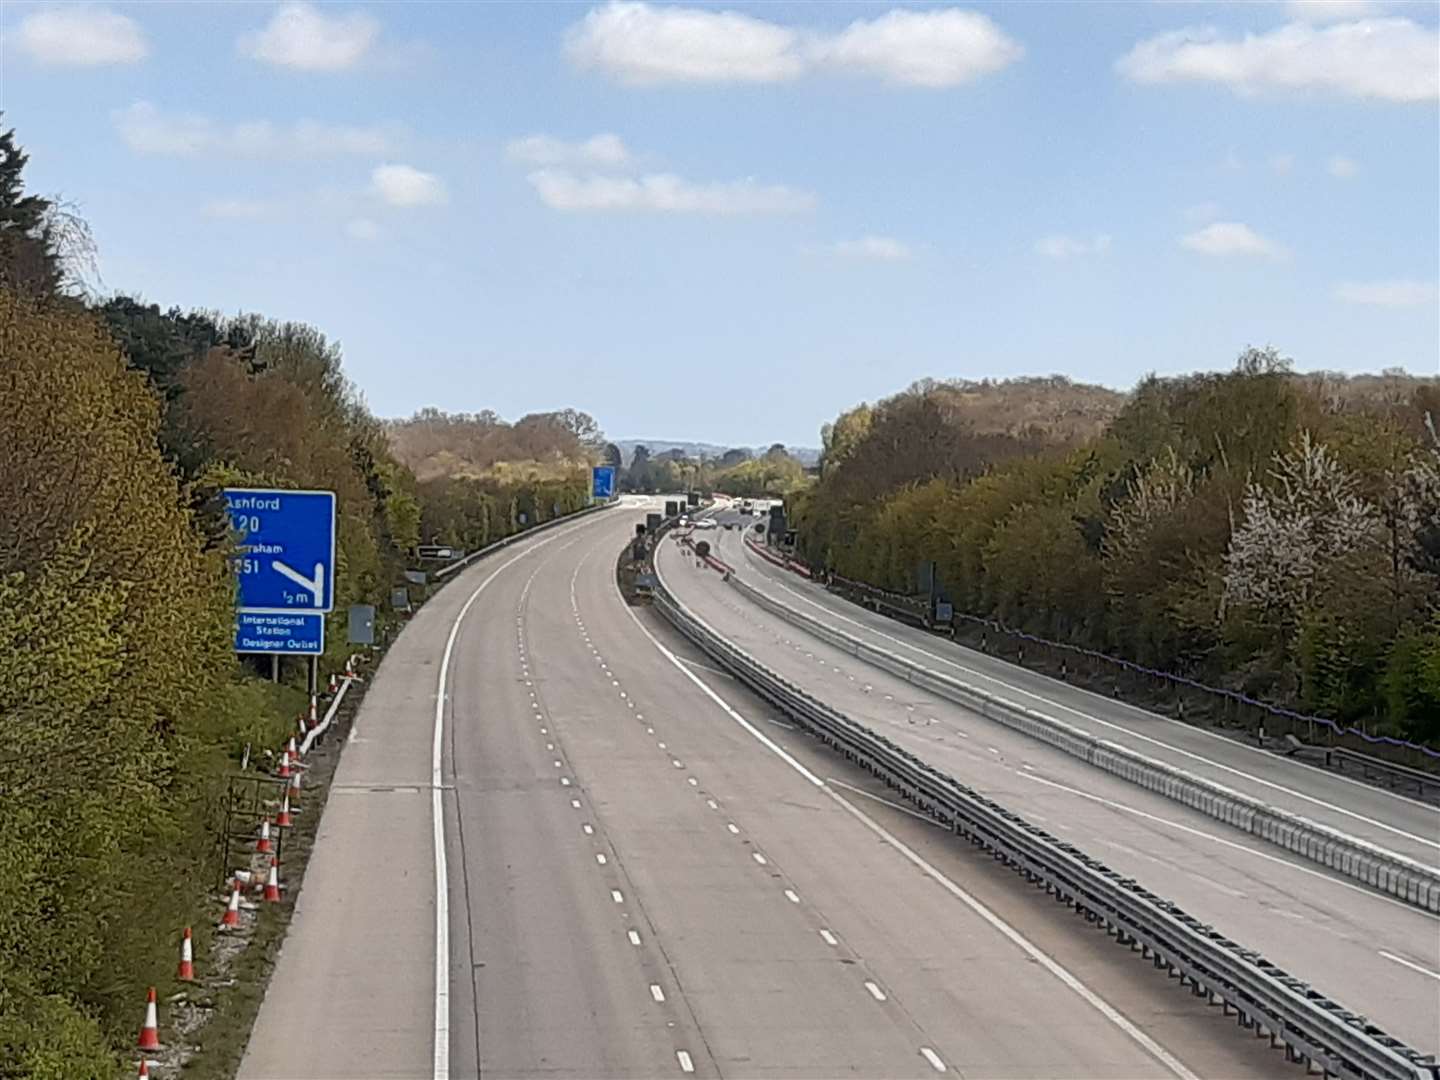 The M20 has now been cleared